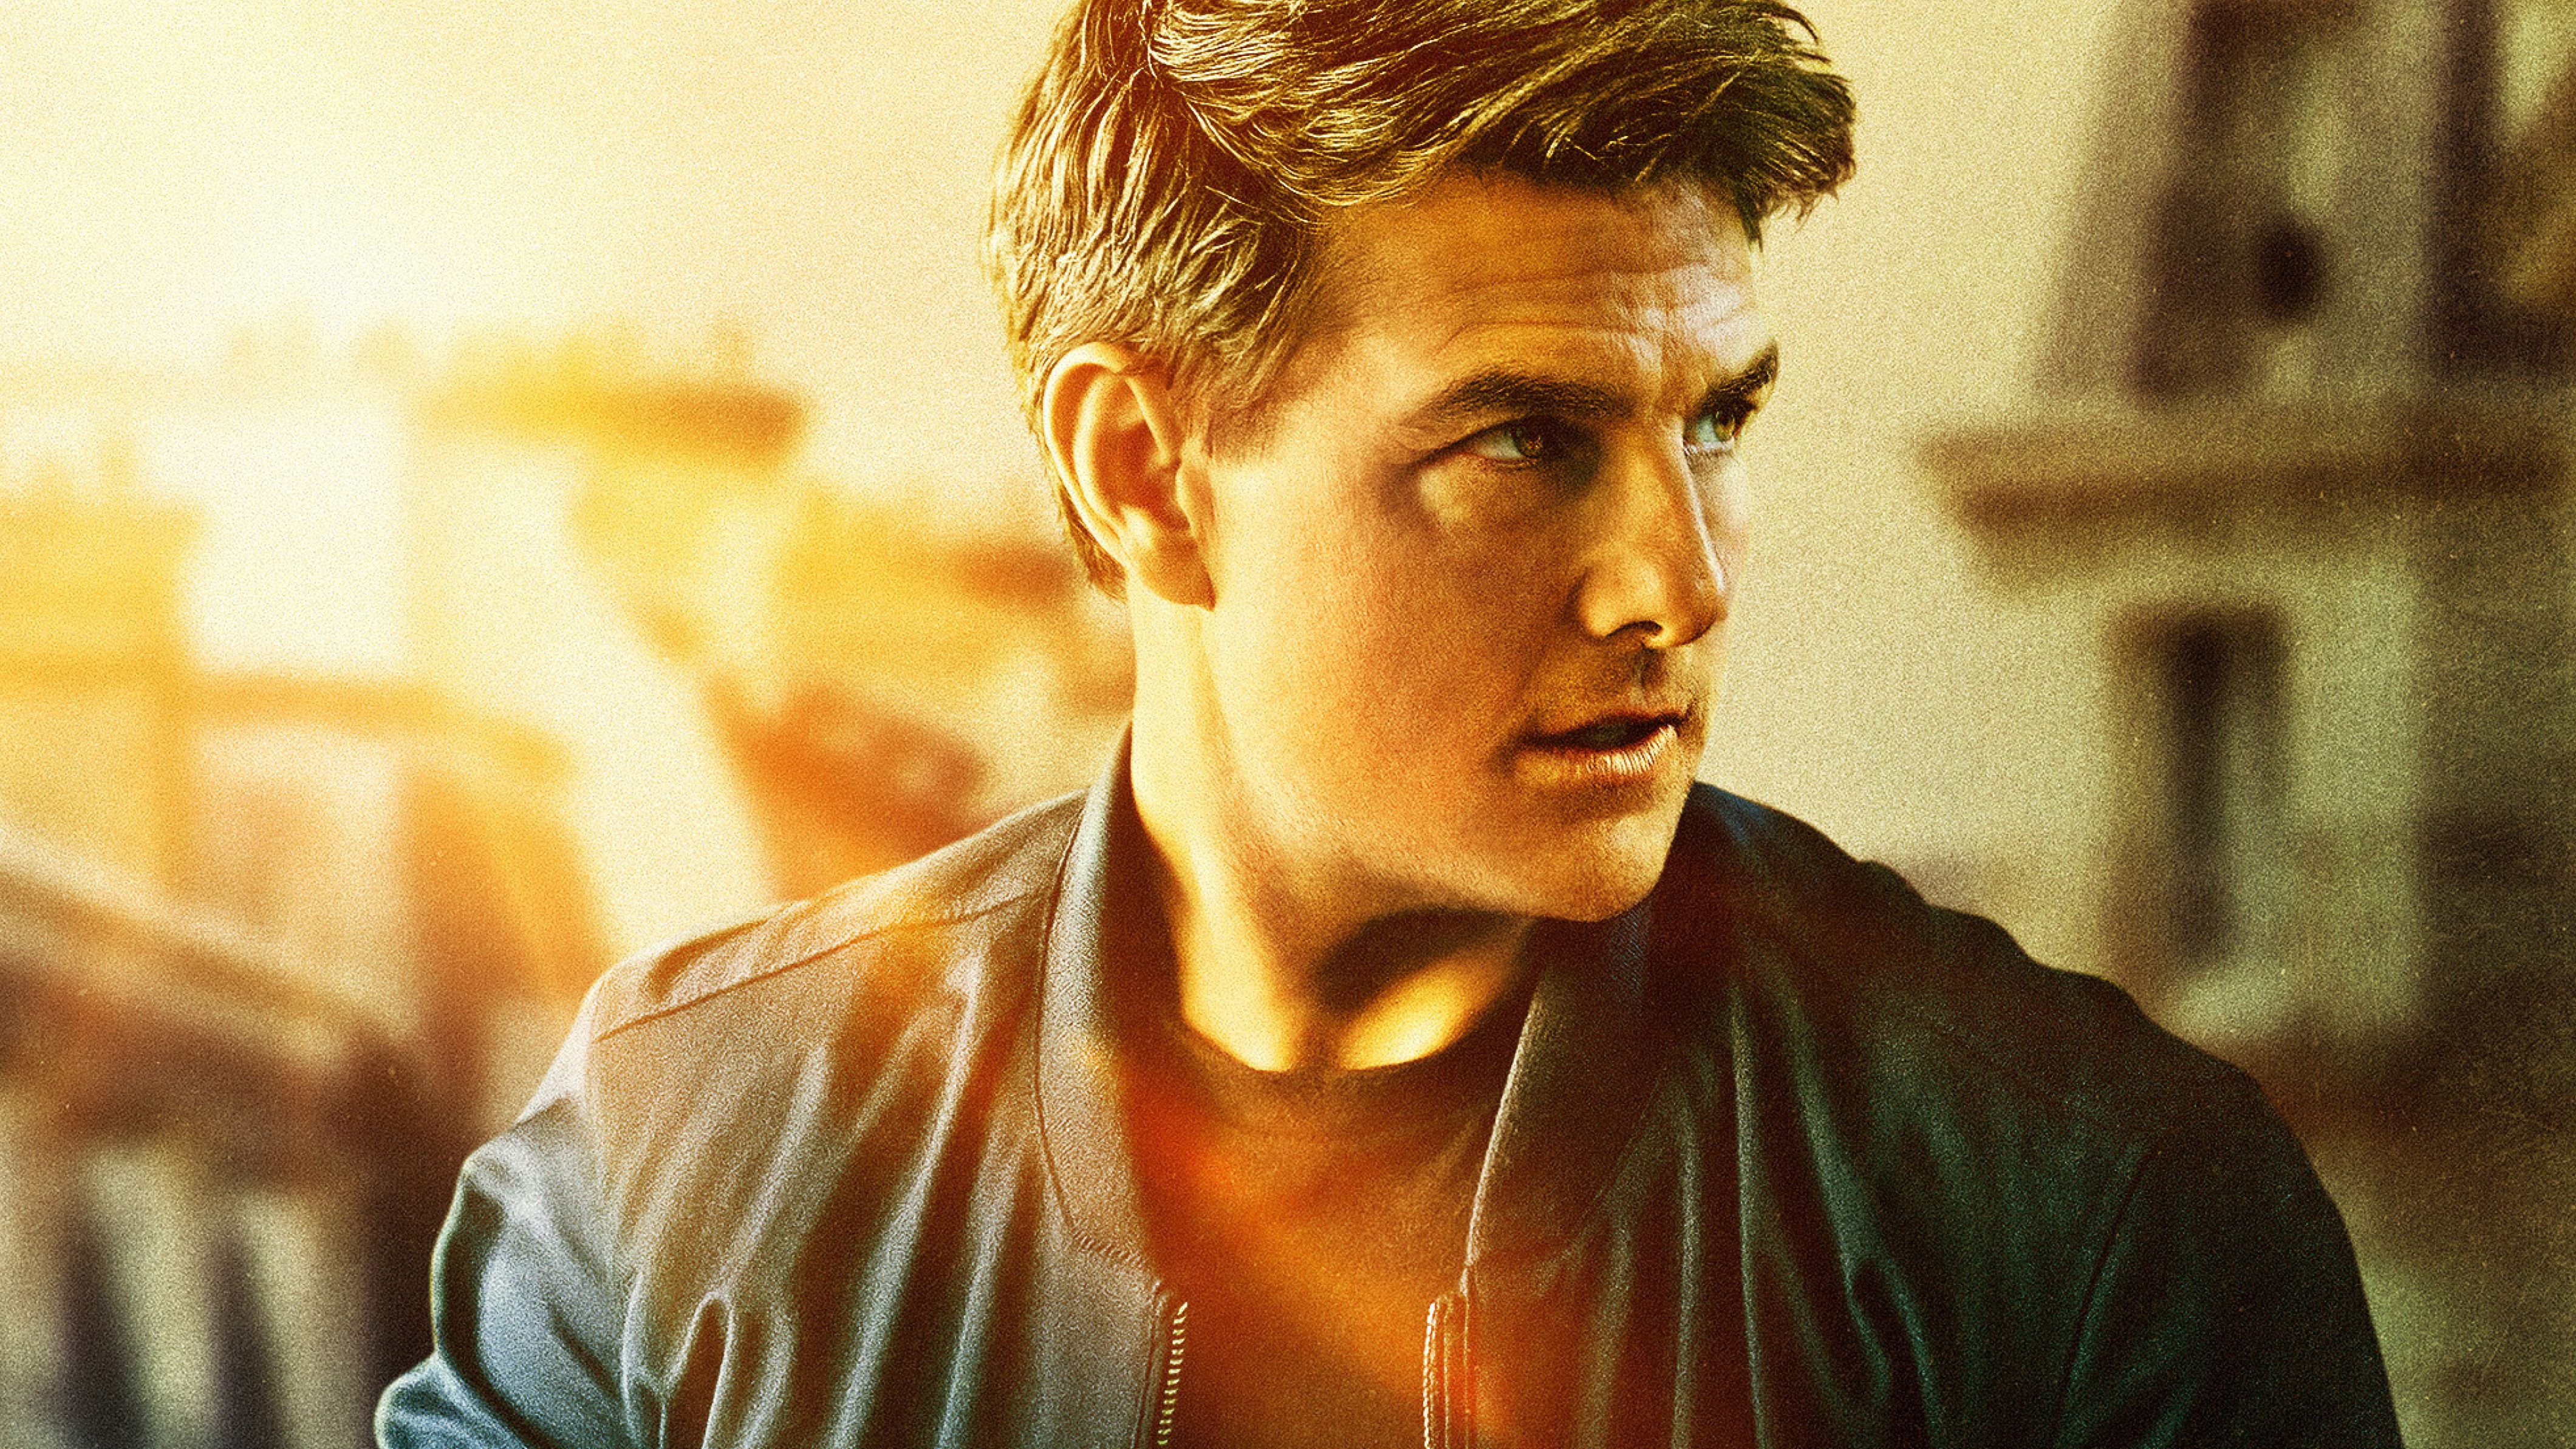 Tom Cruise As Ethan Hunt In Mission Impossible Fallout Movie 2048x1152 Resolution HD 4k Wallpaper, Image, Background, Photo and Picture